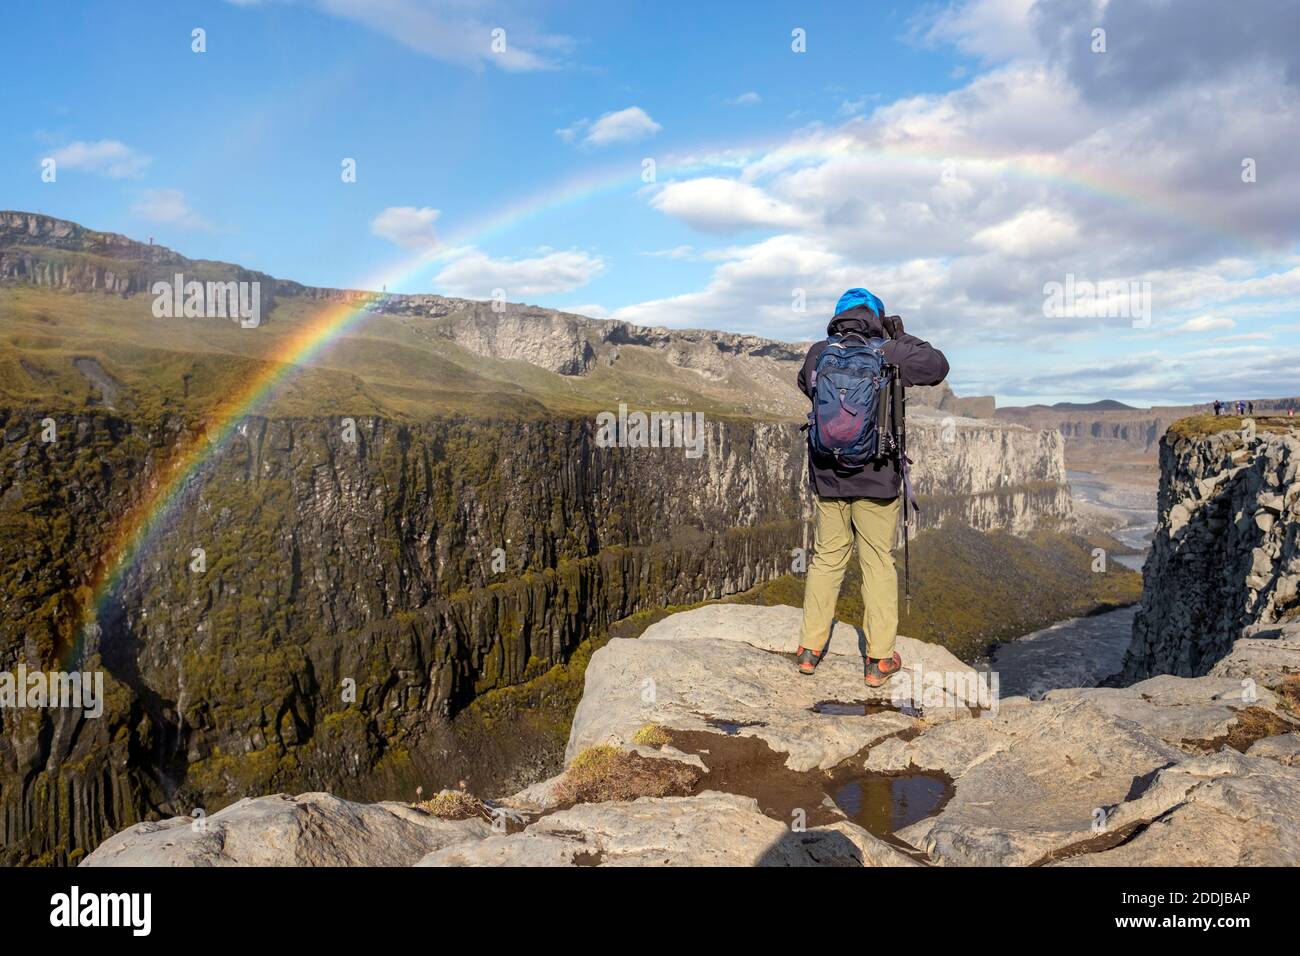 A photographer takes pictures over a canyon near Detifoss waterfall, Iceland's golden ring. Stock Photo